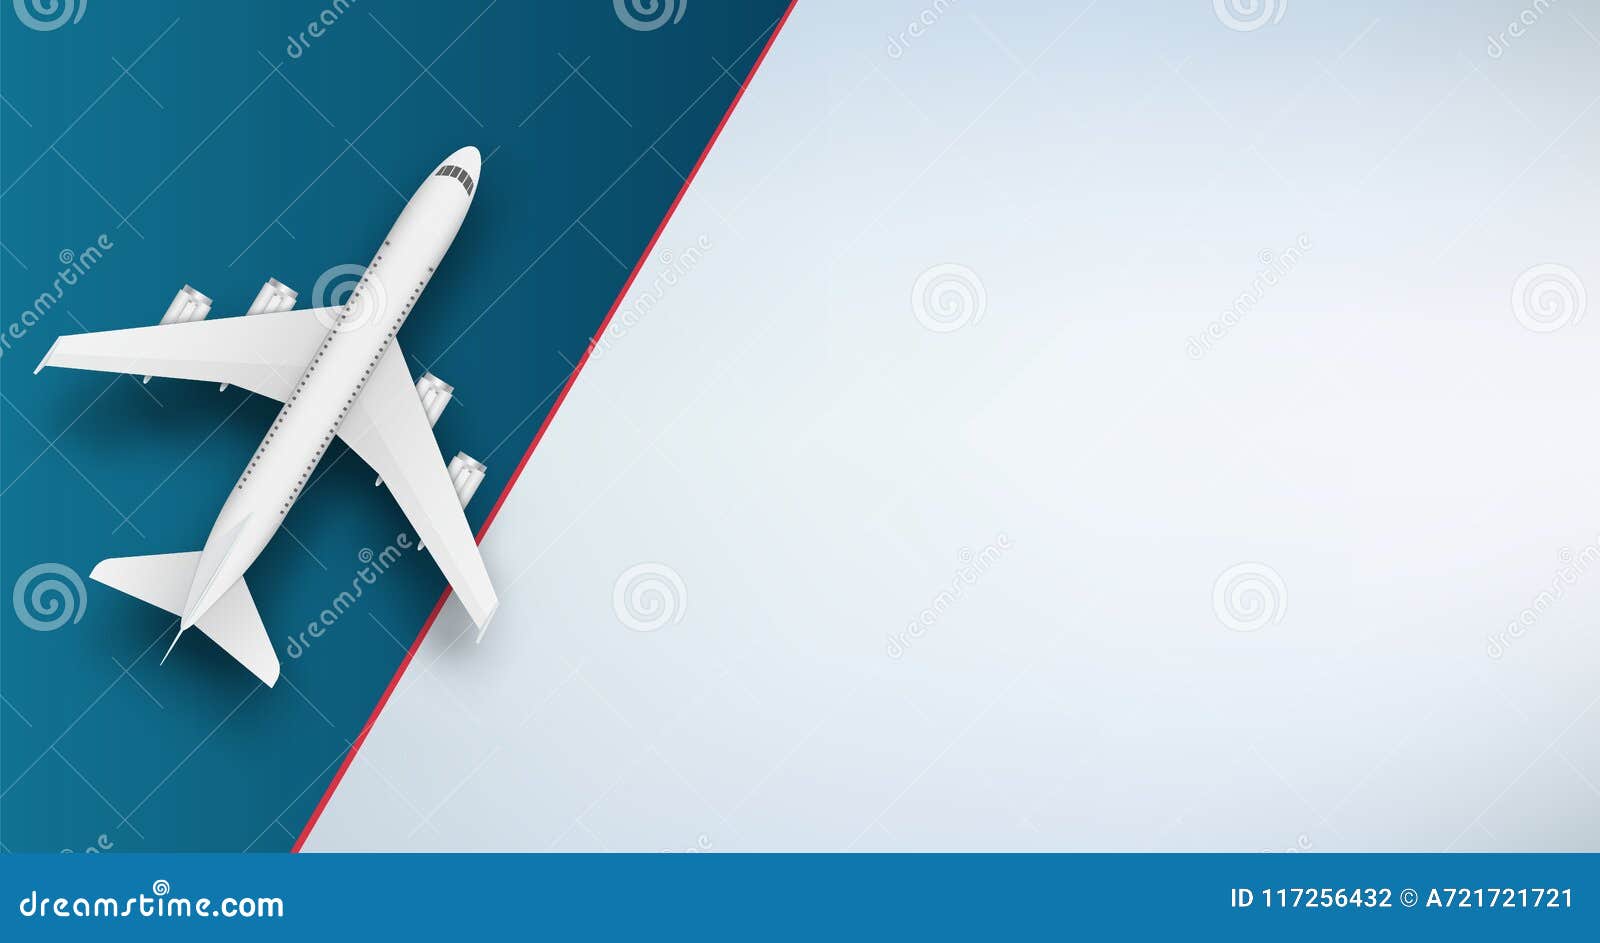 Creative Vector Illustration of Plane Isolated on Colorful Background. Top  View Airplane Stock Vector - Illustration of modern, flight: 117256432